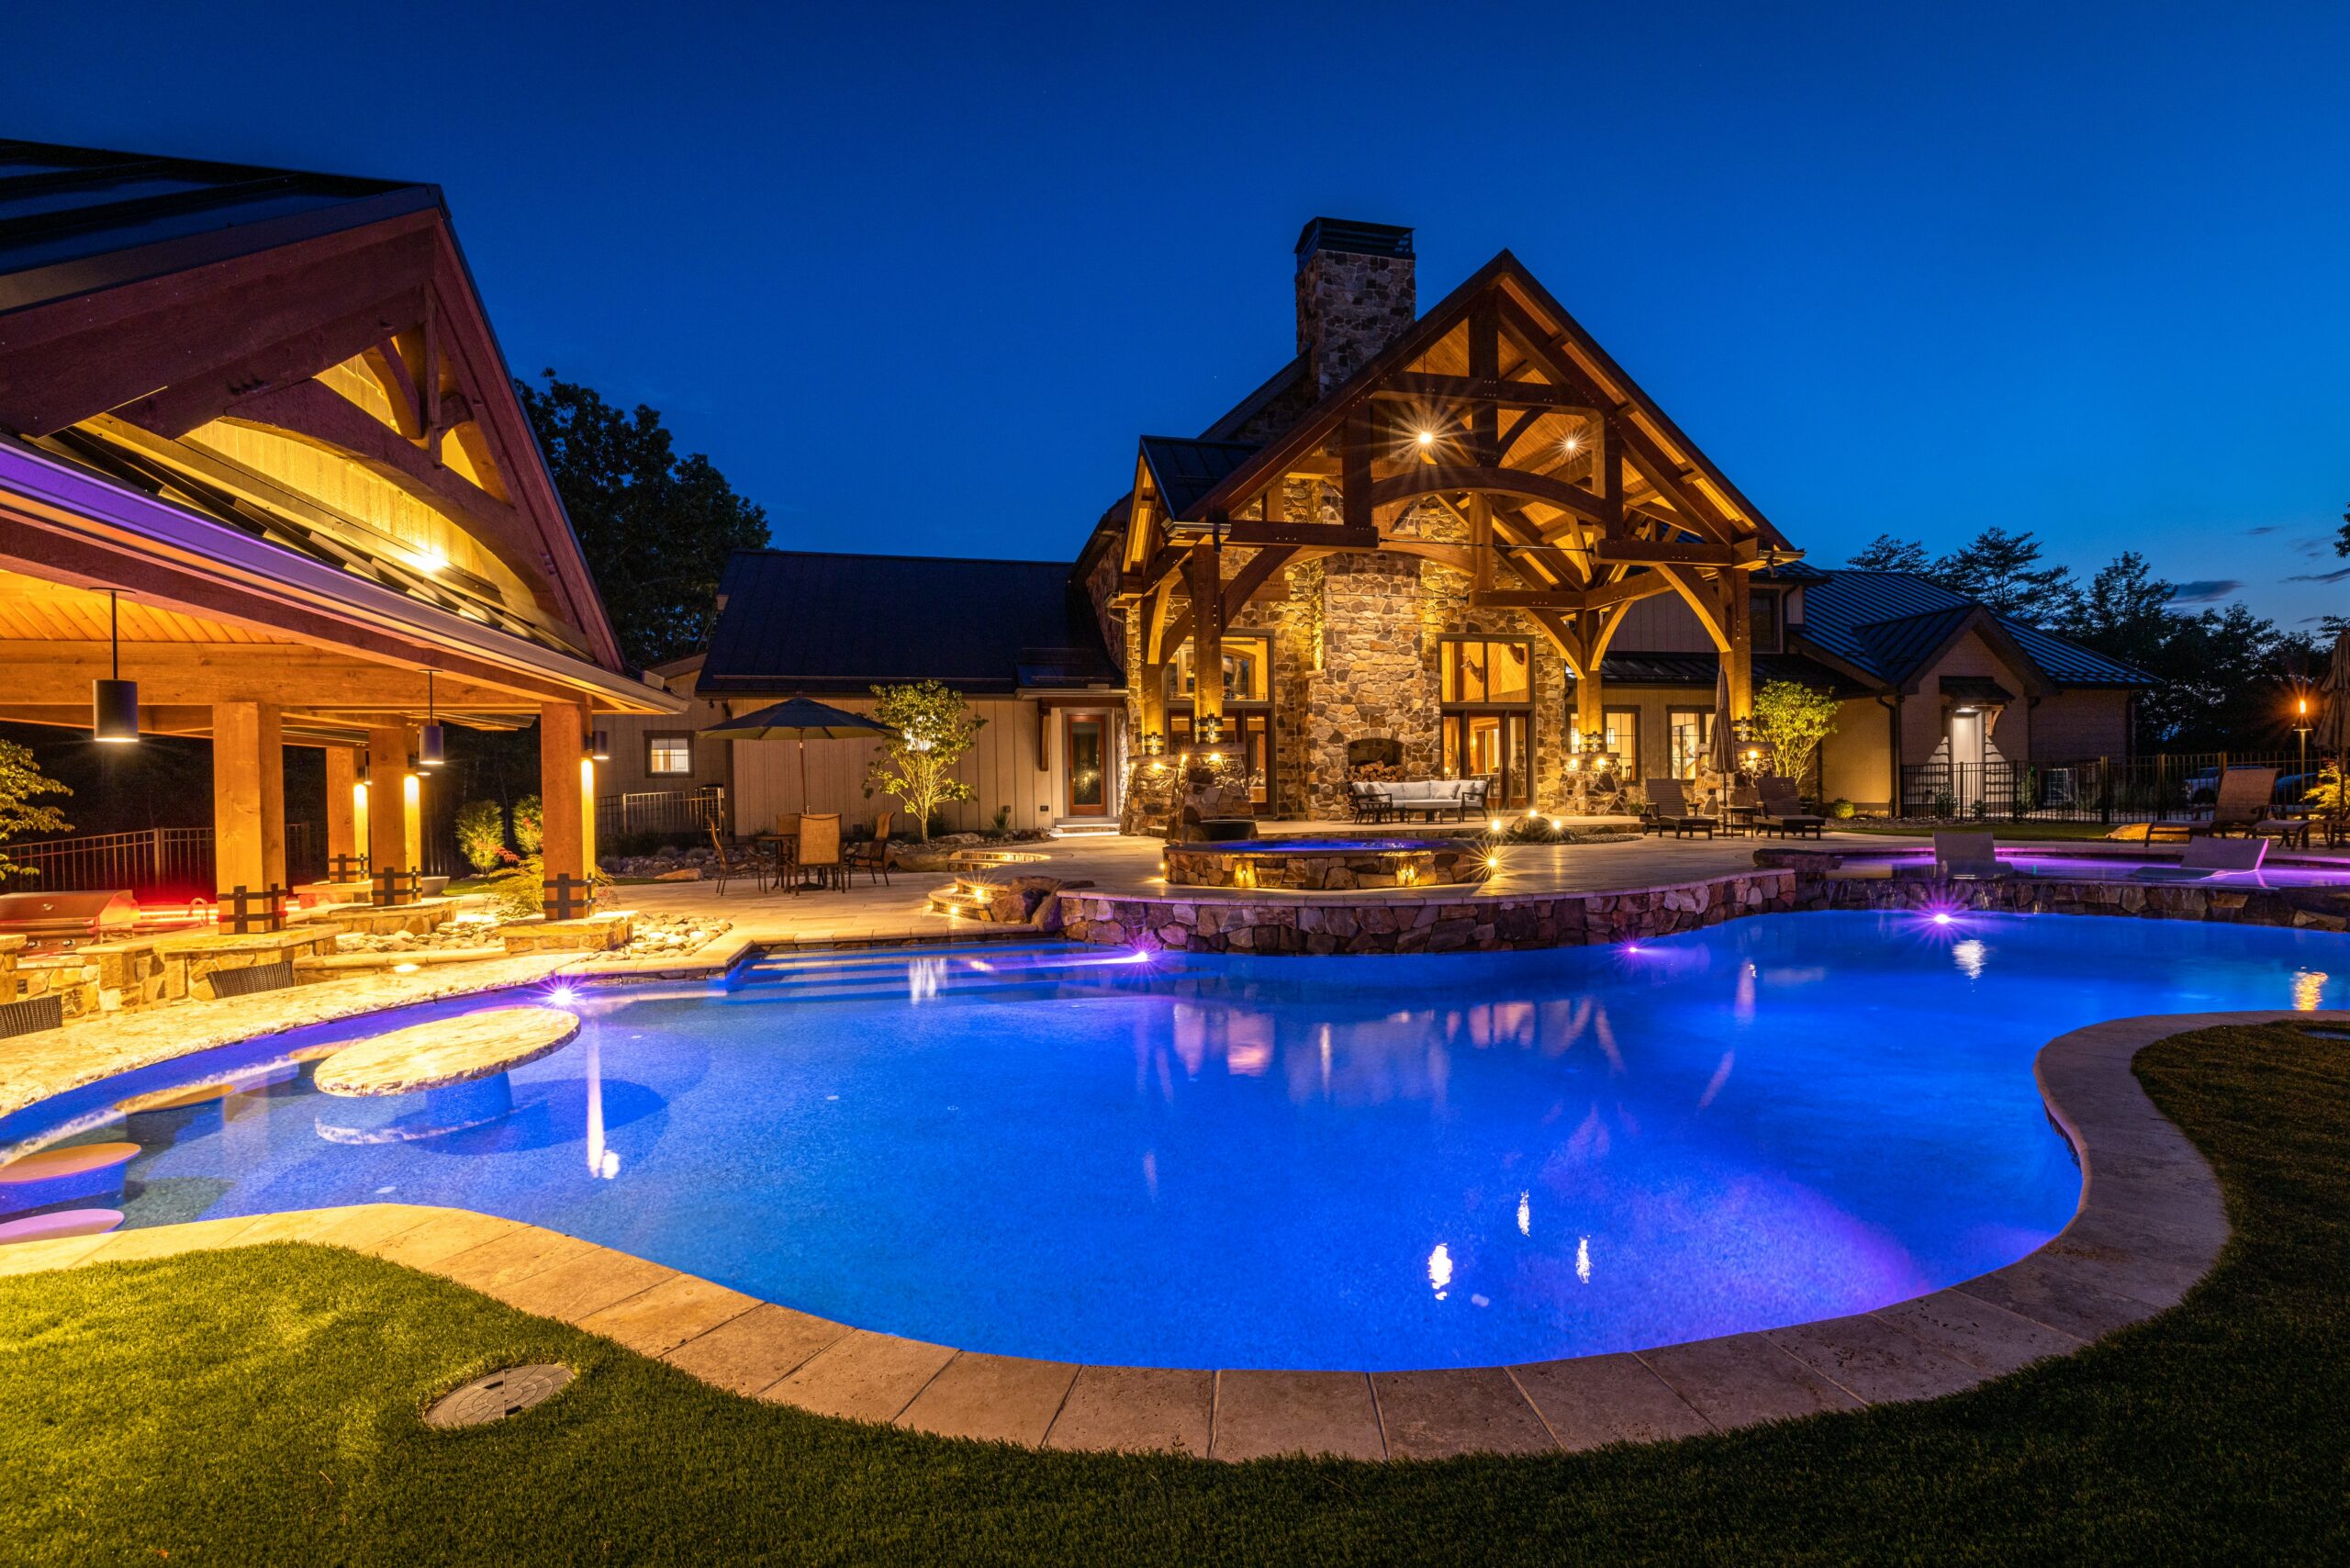 Outdoor lighting around a swimming pool or hardscape